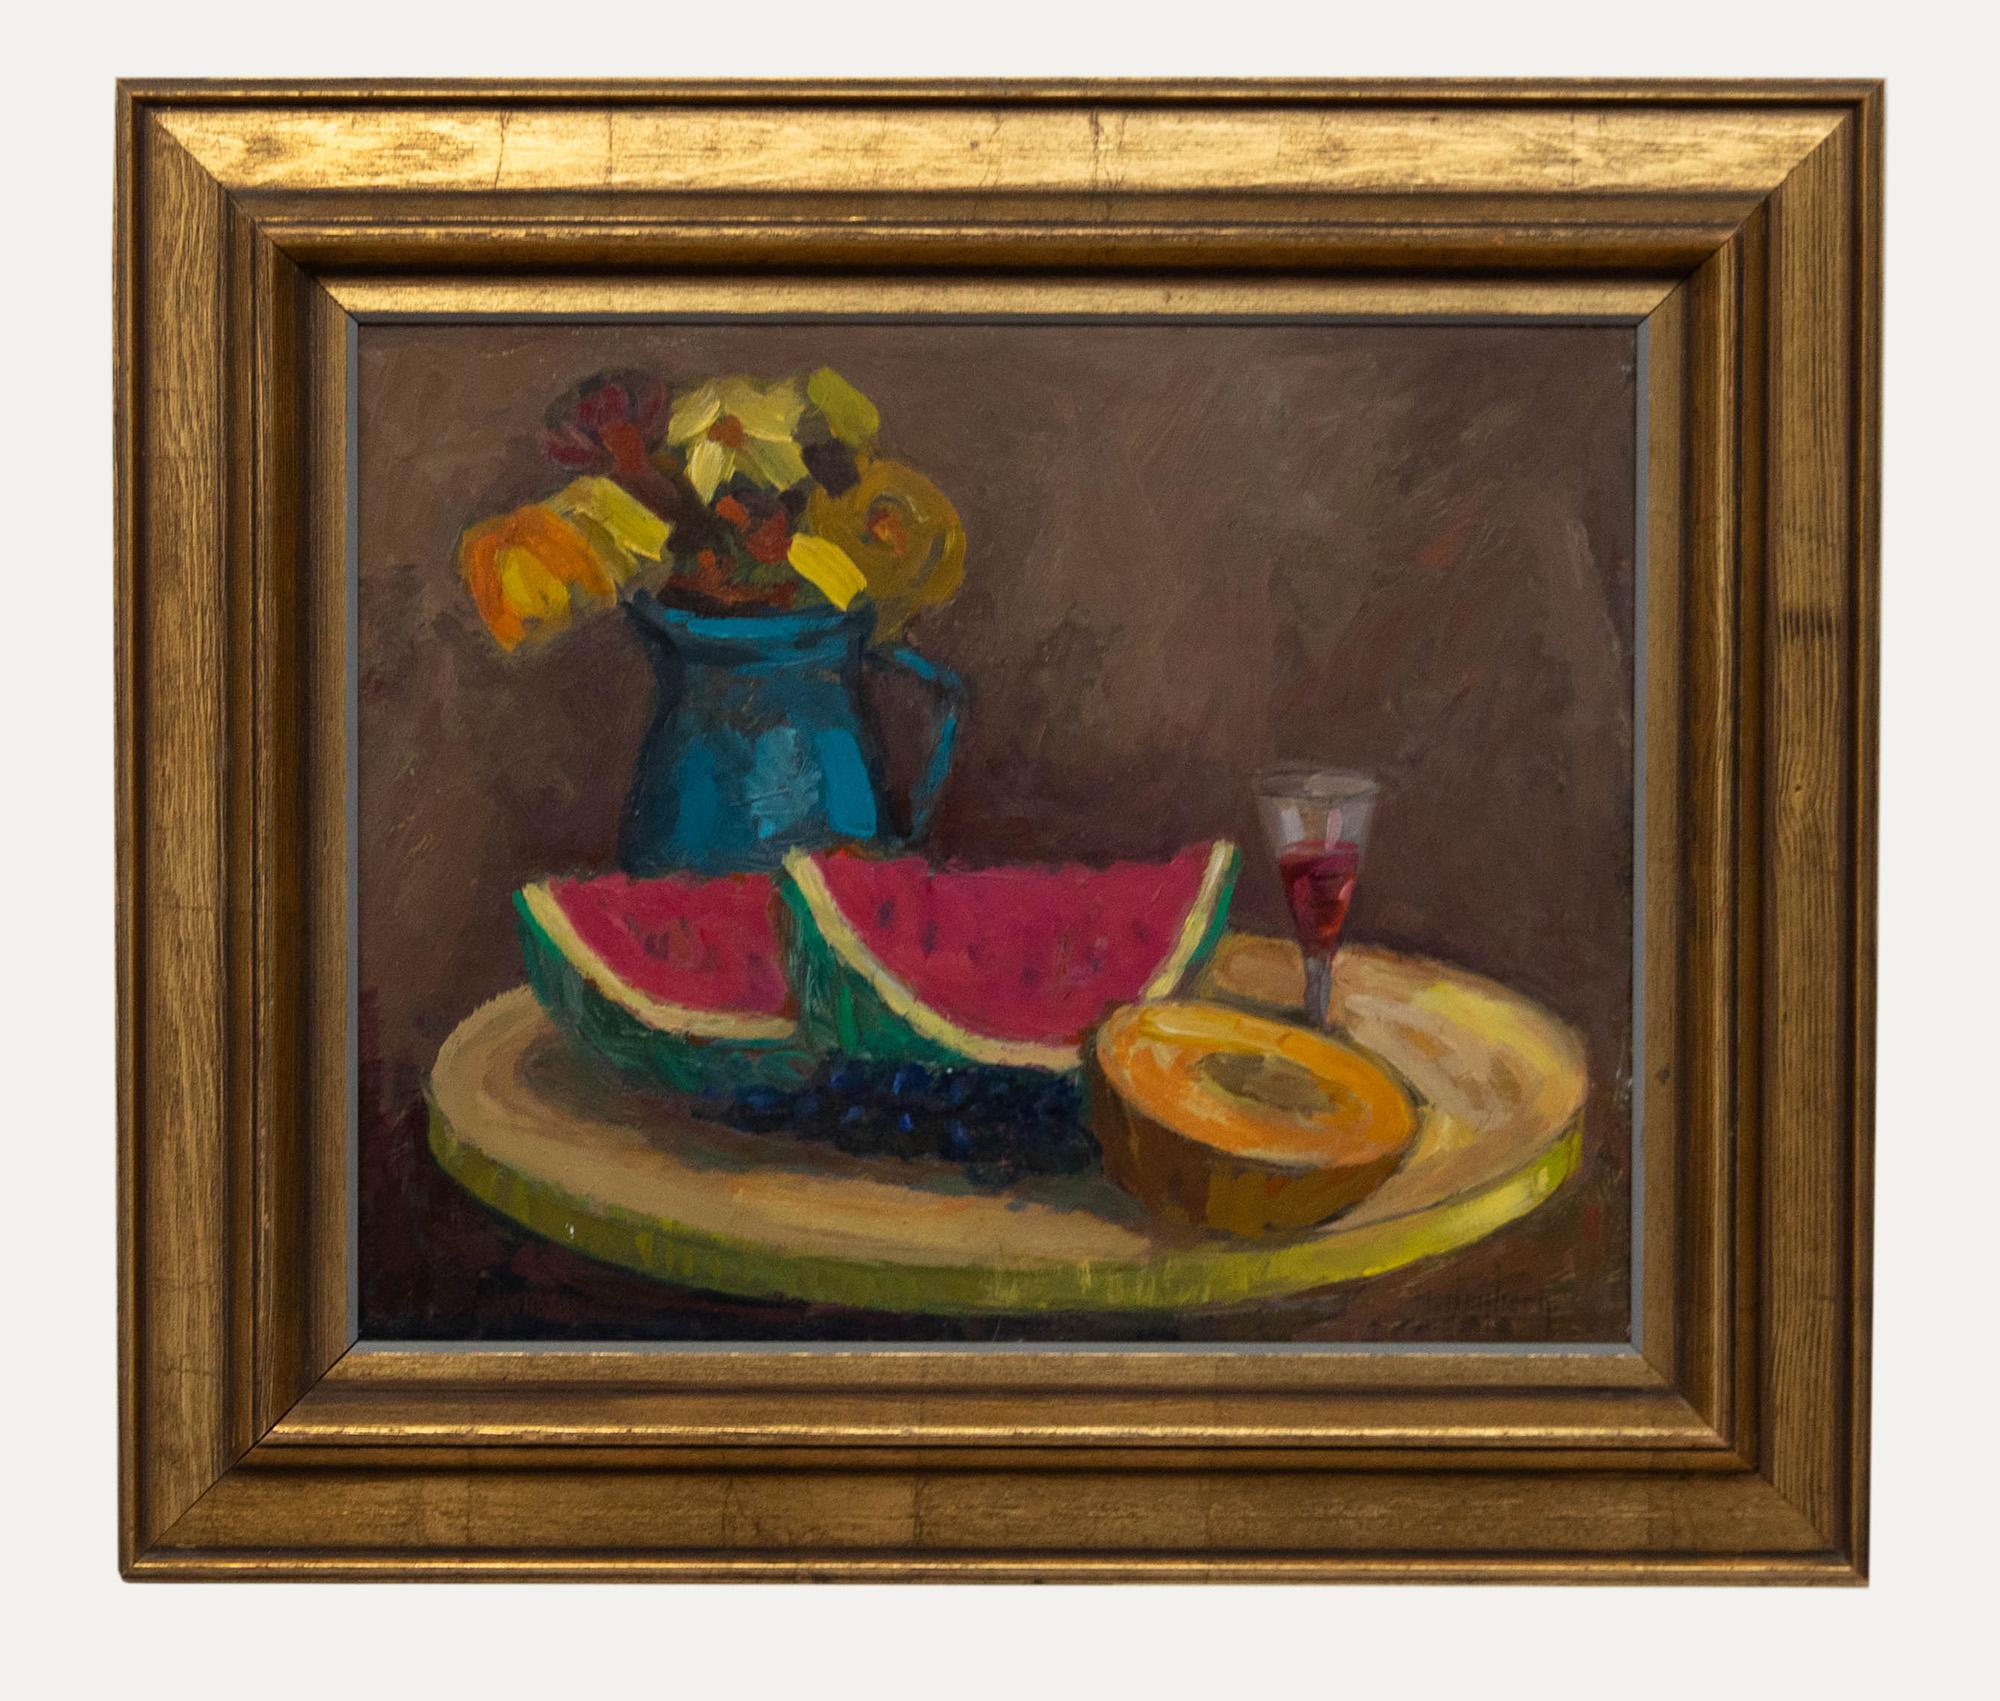 Unknown Still-Life Painting - Hilding Högberg (1897-1995) - Mid 20th Century Oil, Watermelon and Flowers